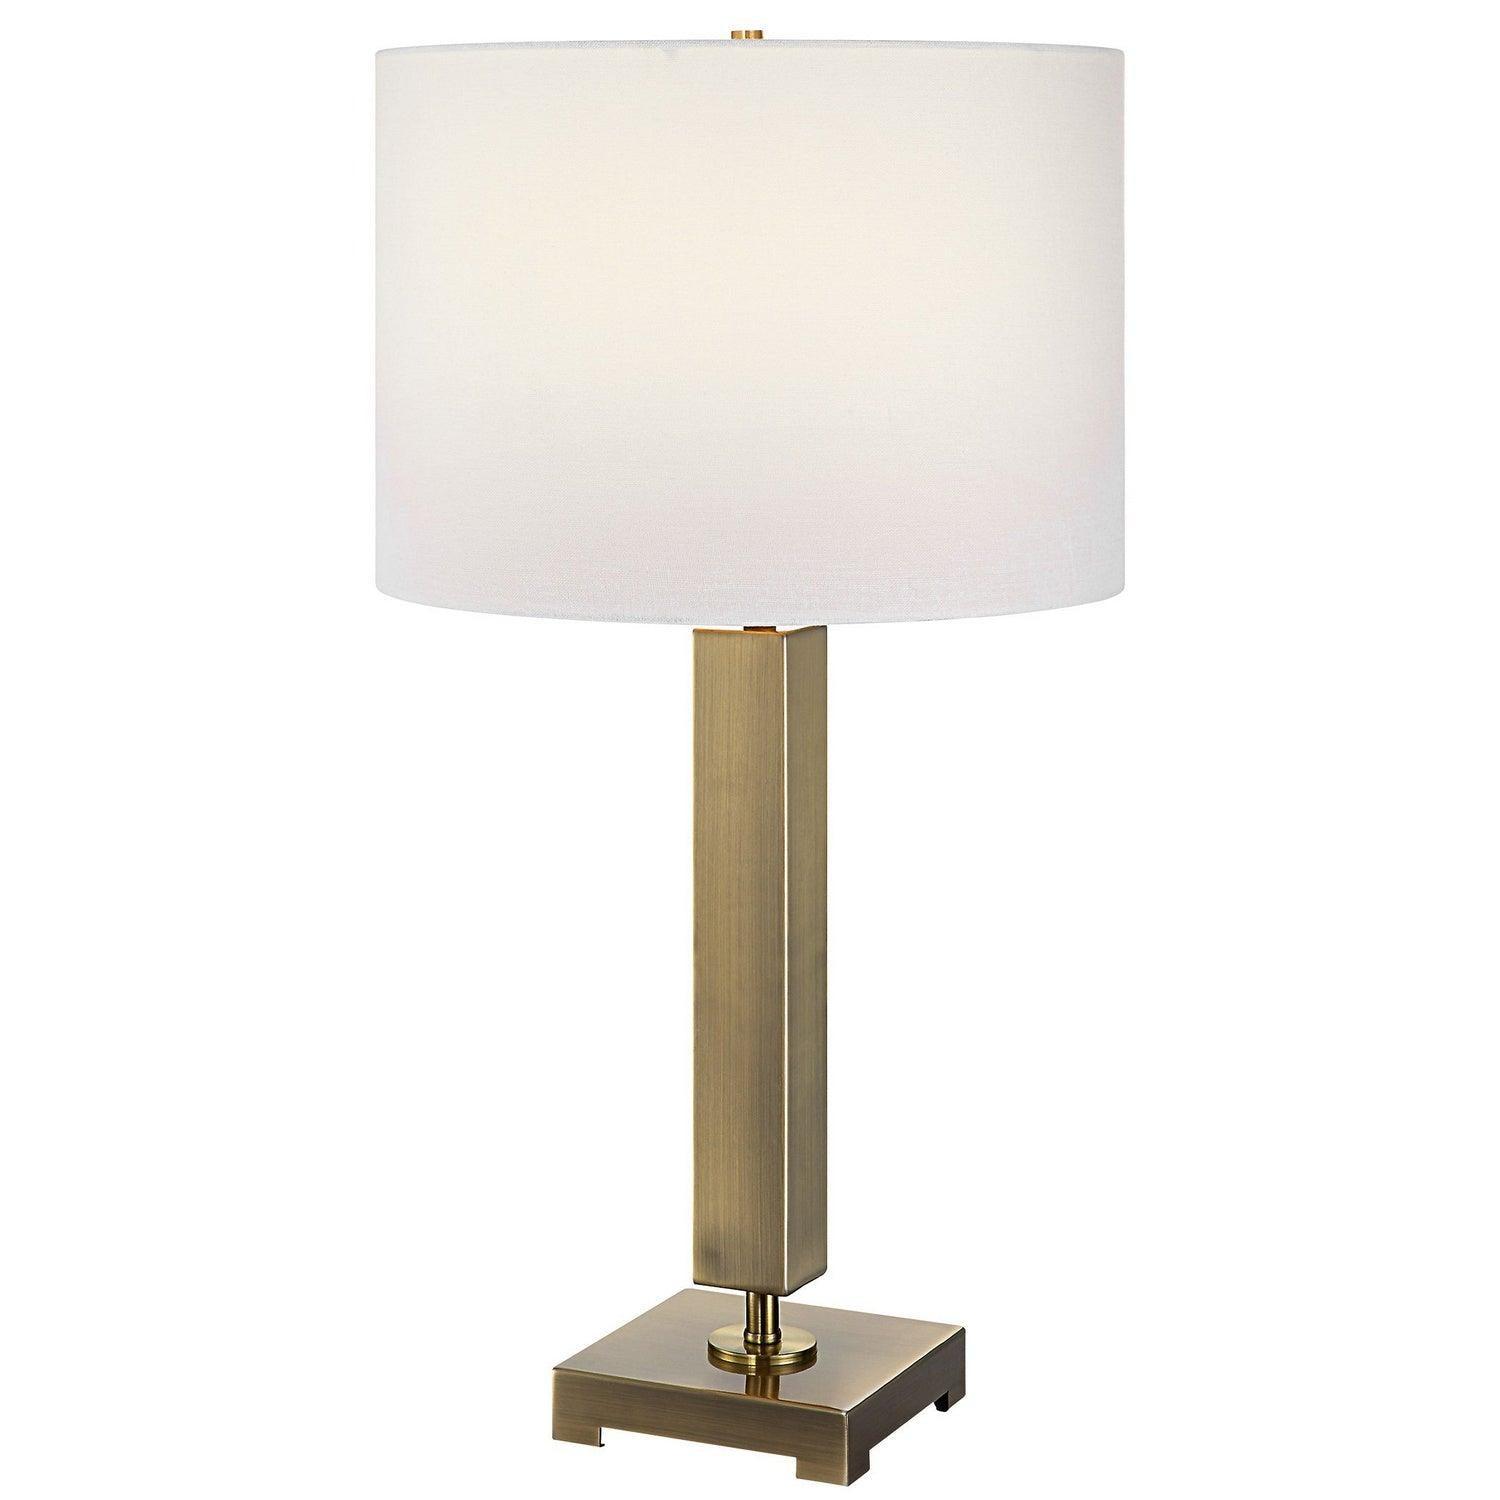 The Uttermost - Duomo Table Lamp - 30014-1 | Montreal Lighting & Hardware